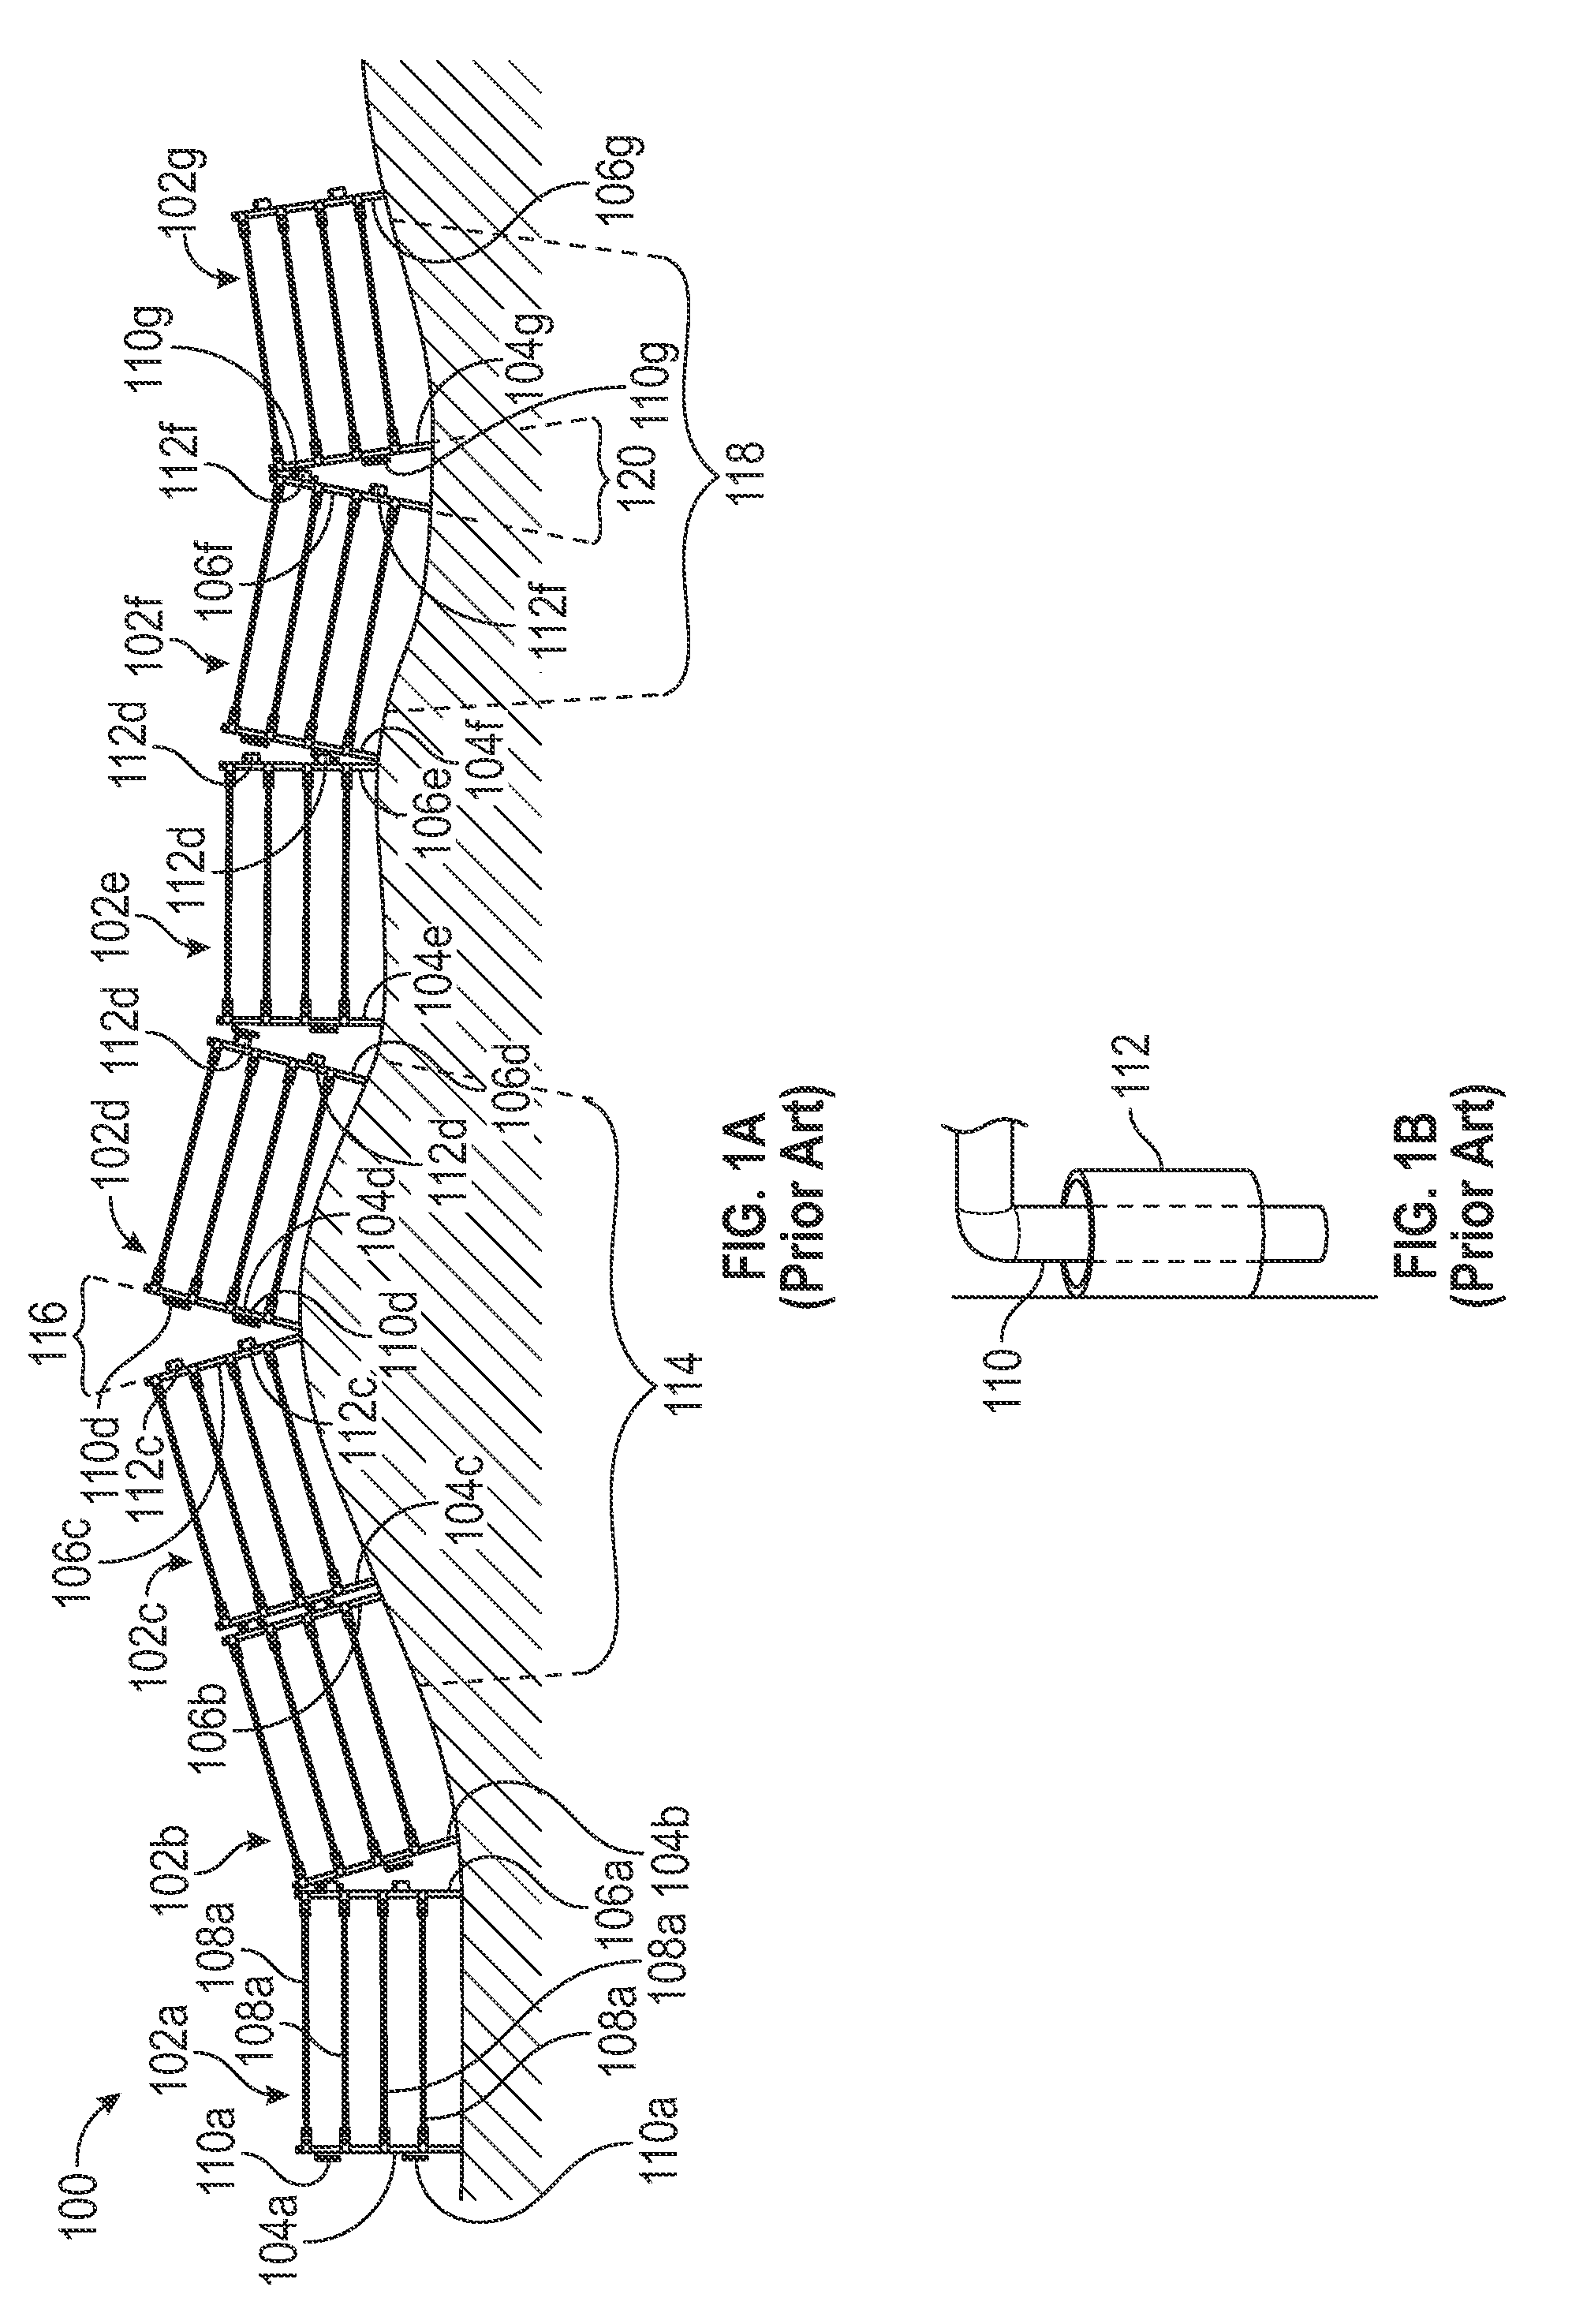 Fencing panel and method of assembly